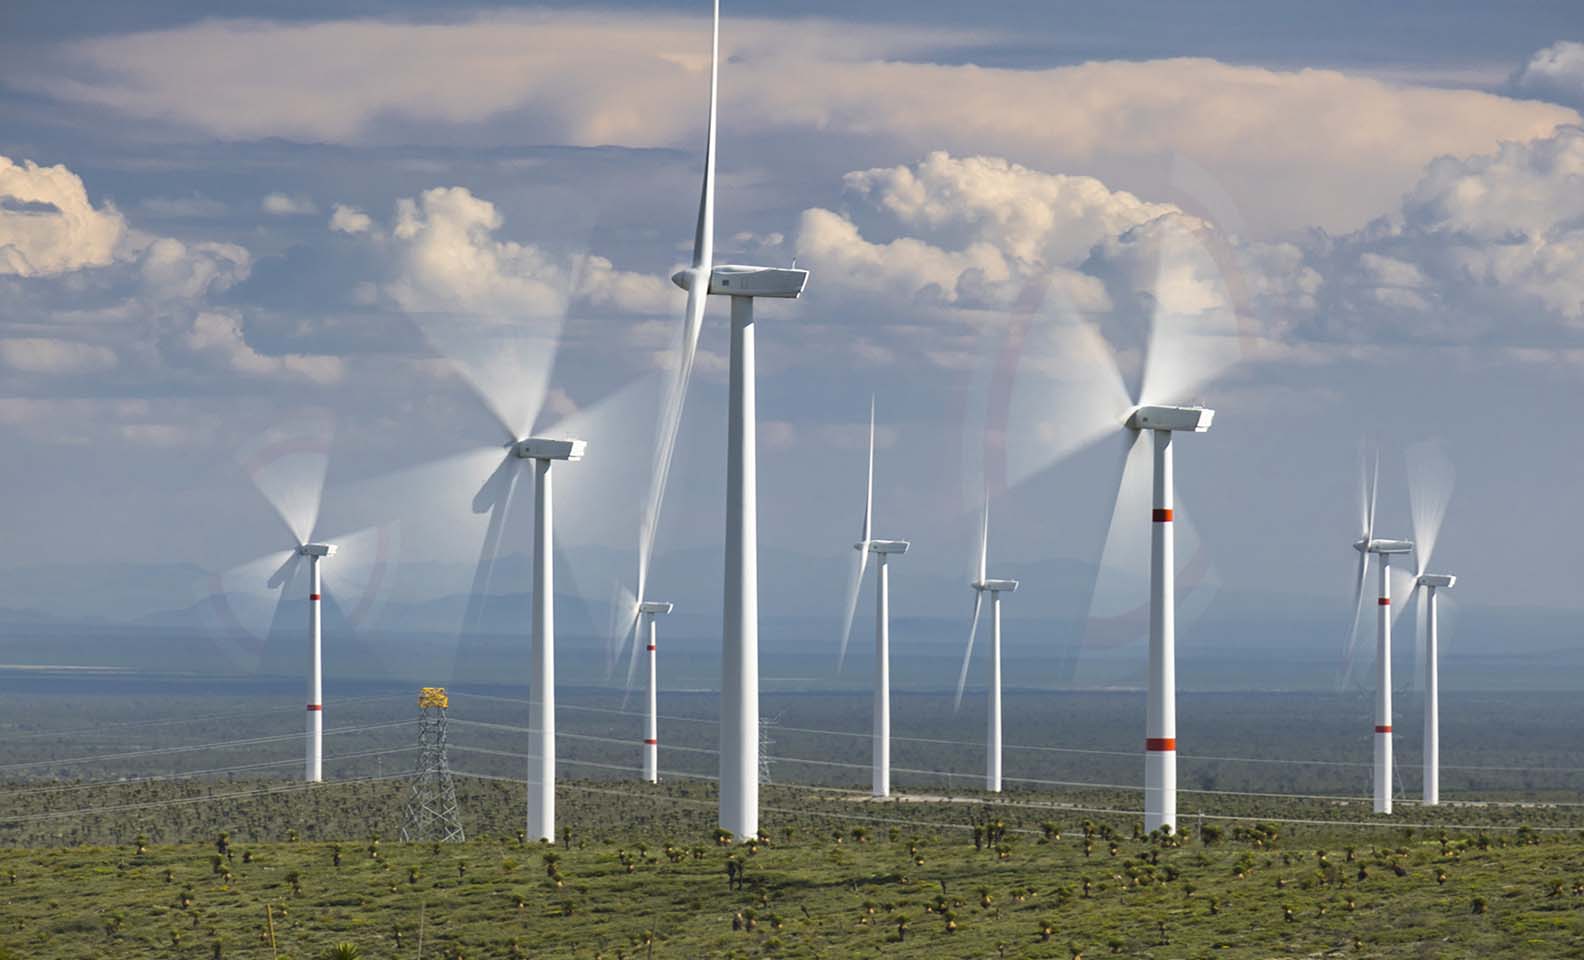 Overview of wind turbines in operation